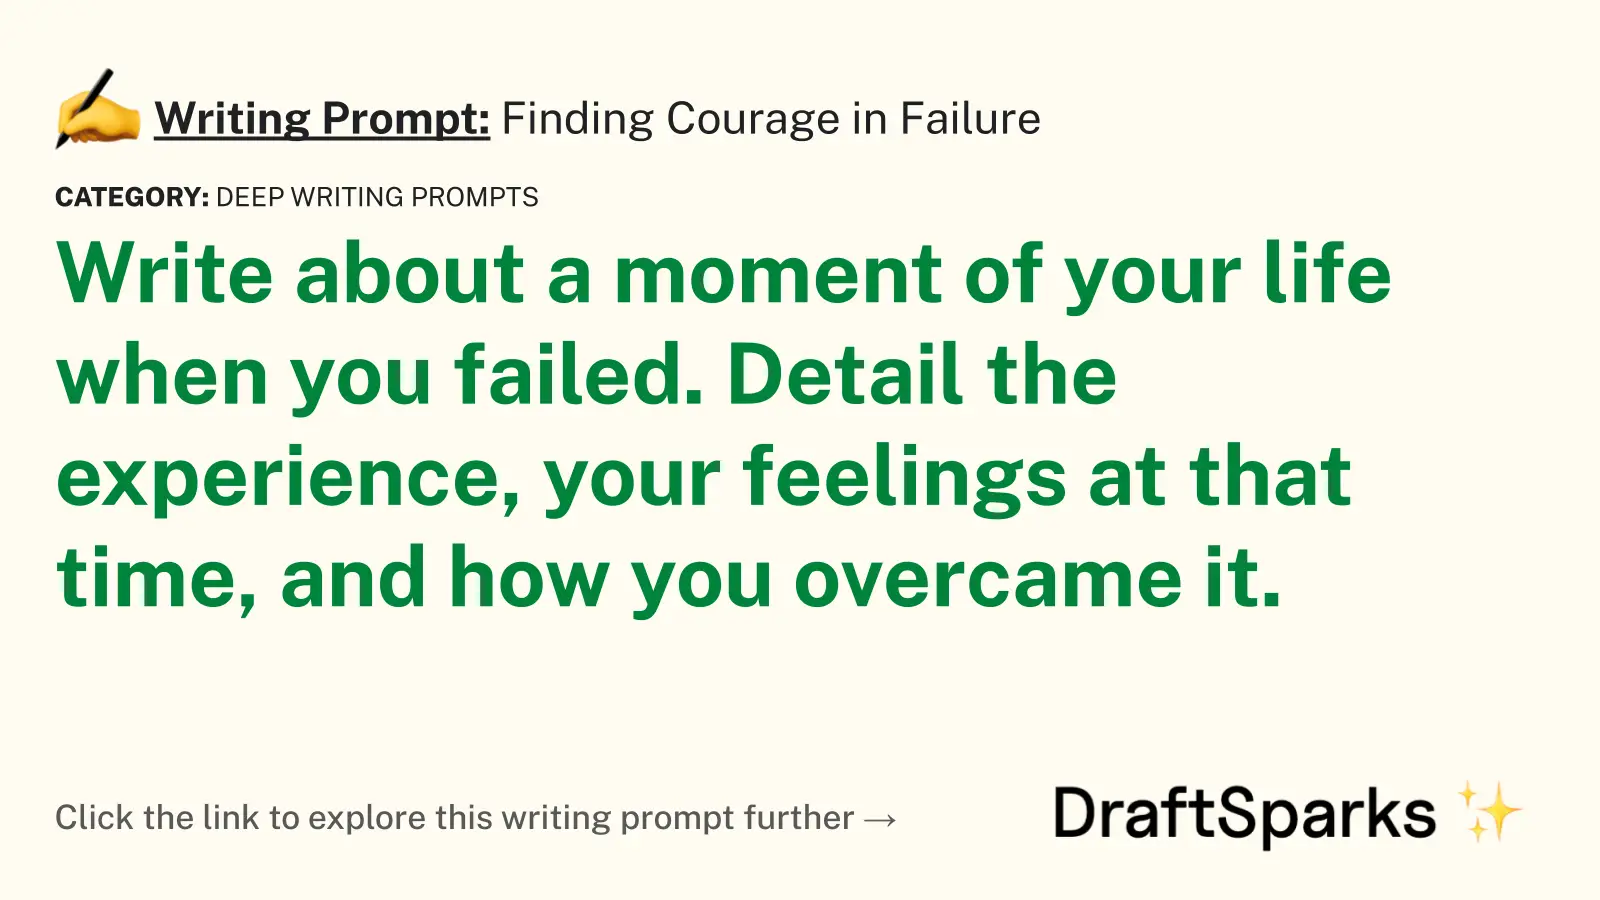 Finding Courage in Failure